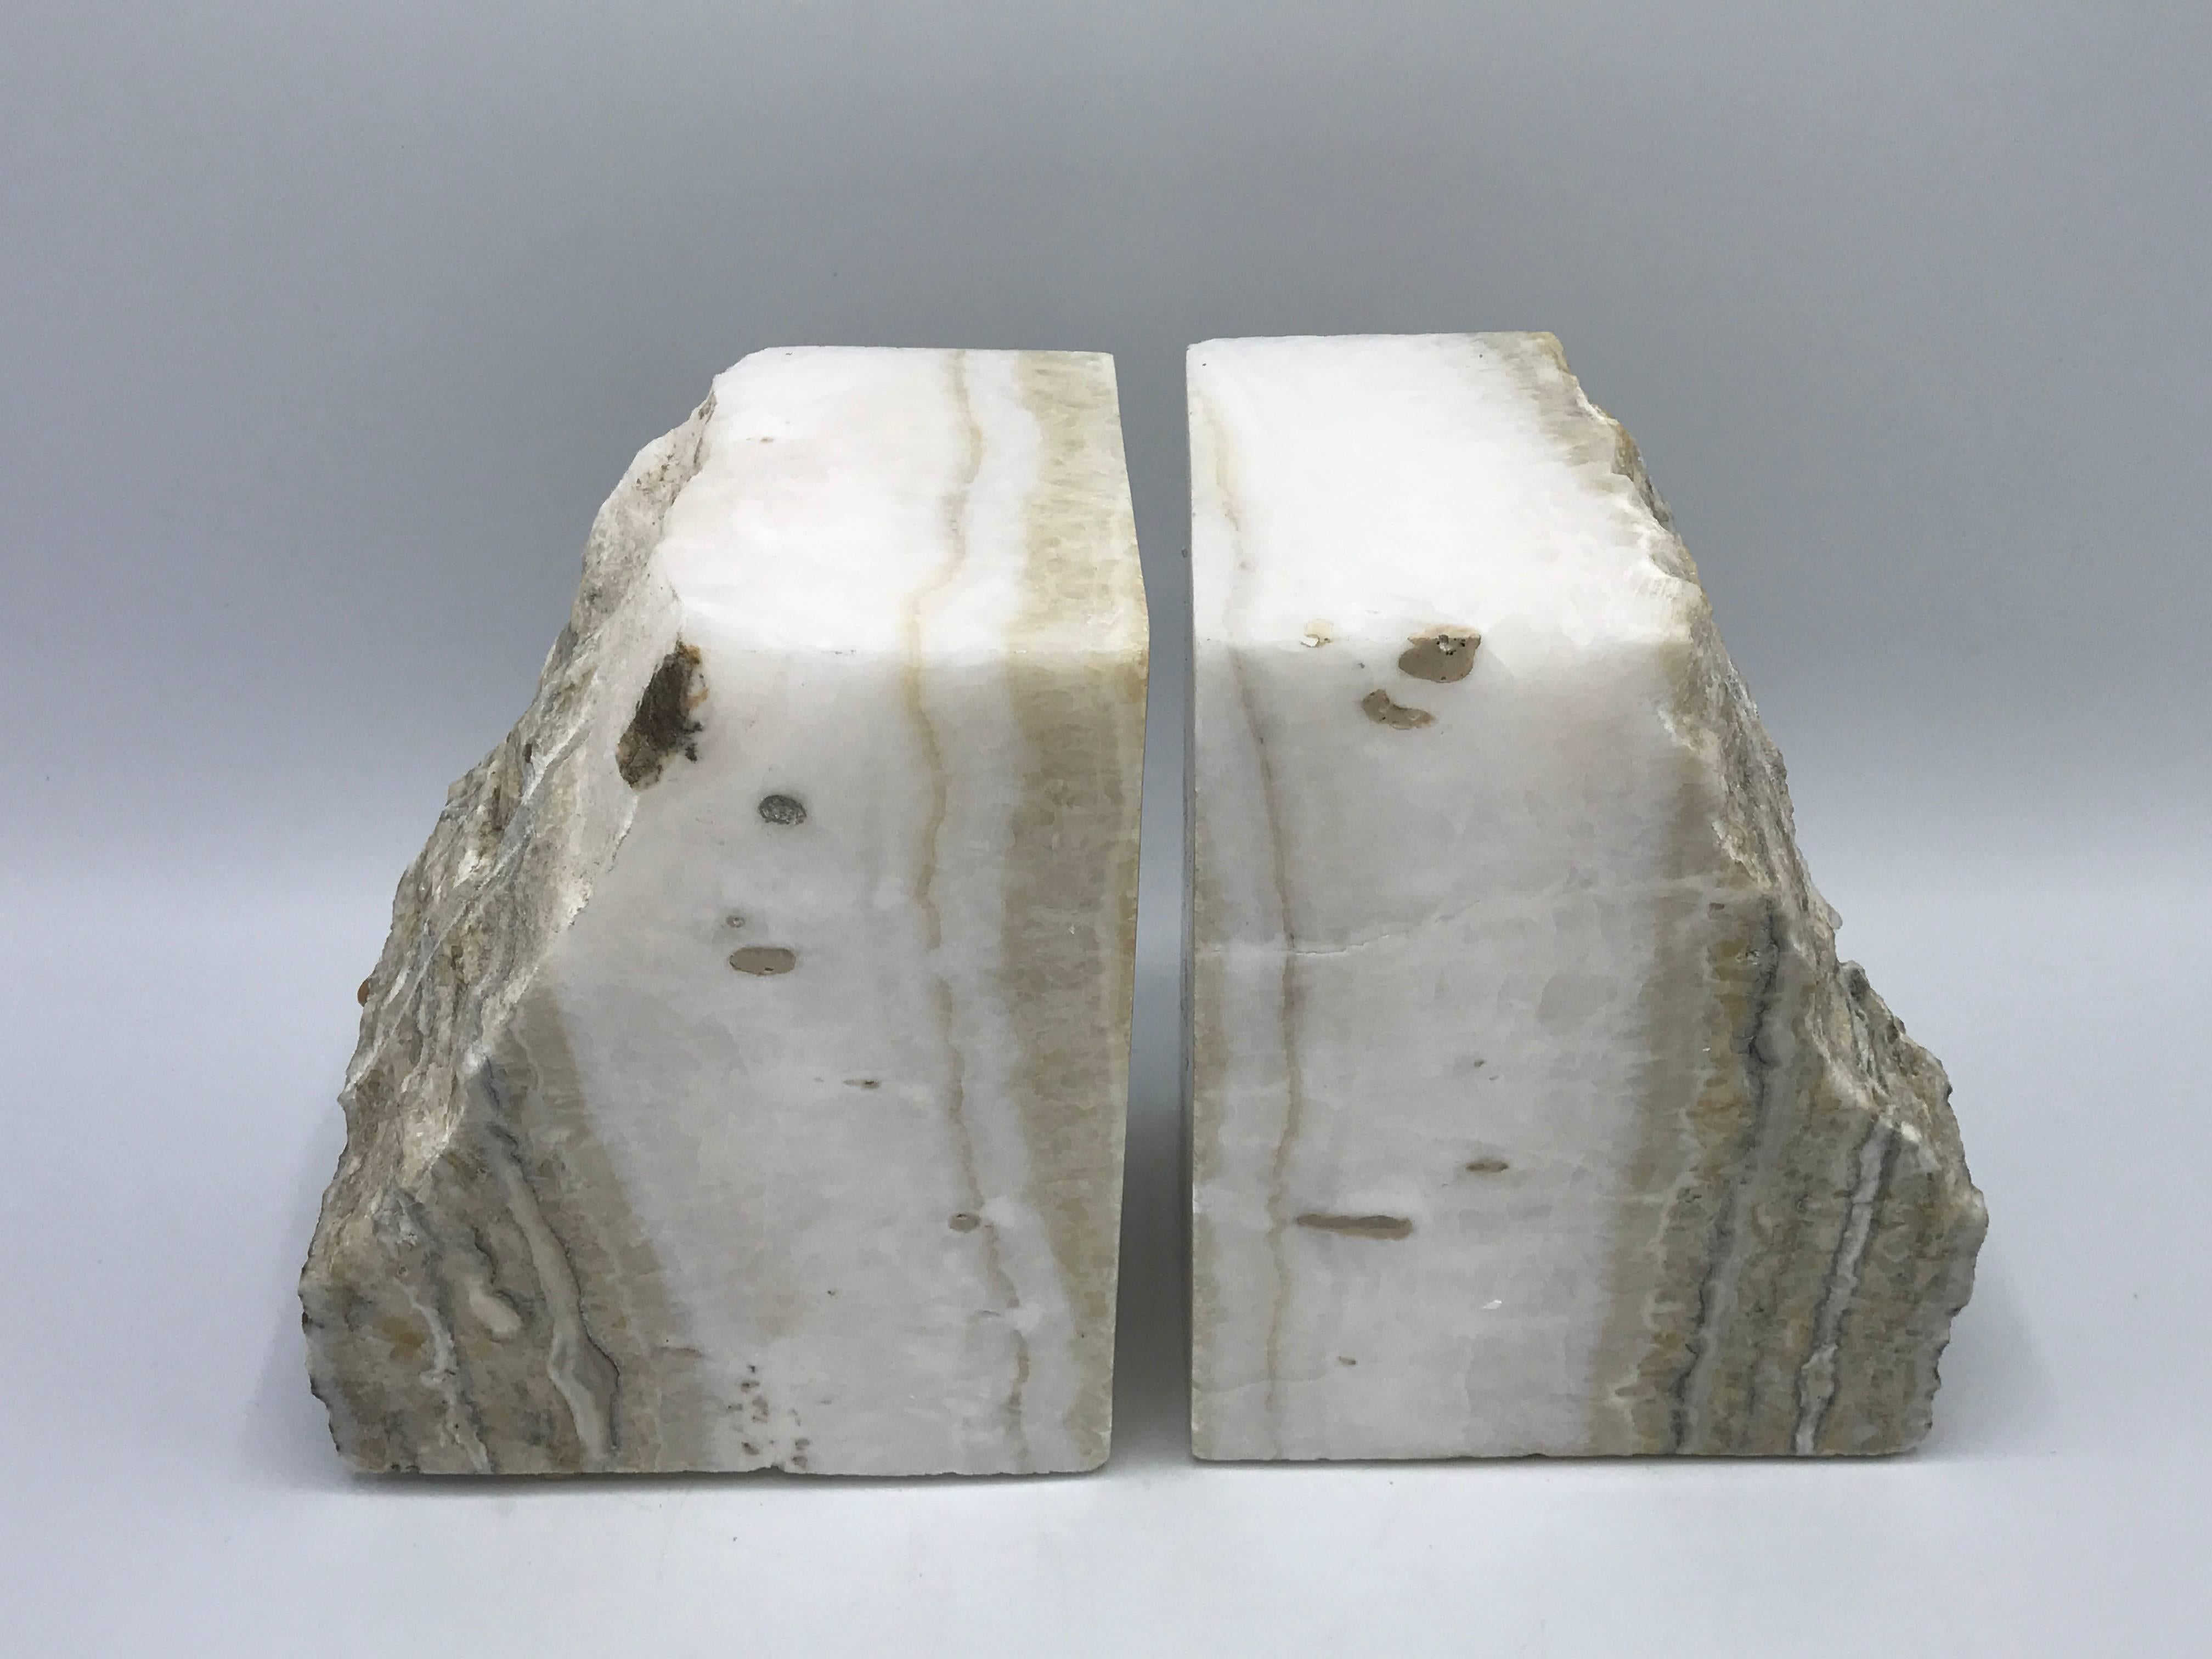 Offered is a gorgeous pair of 1950s white stone bookends. Extremely heavy.